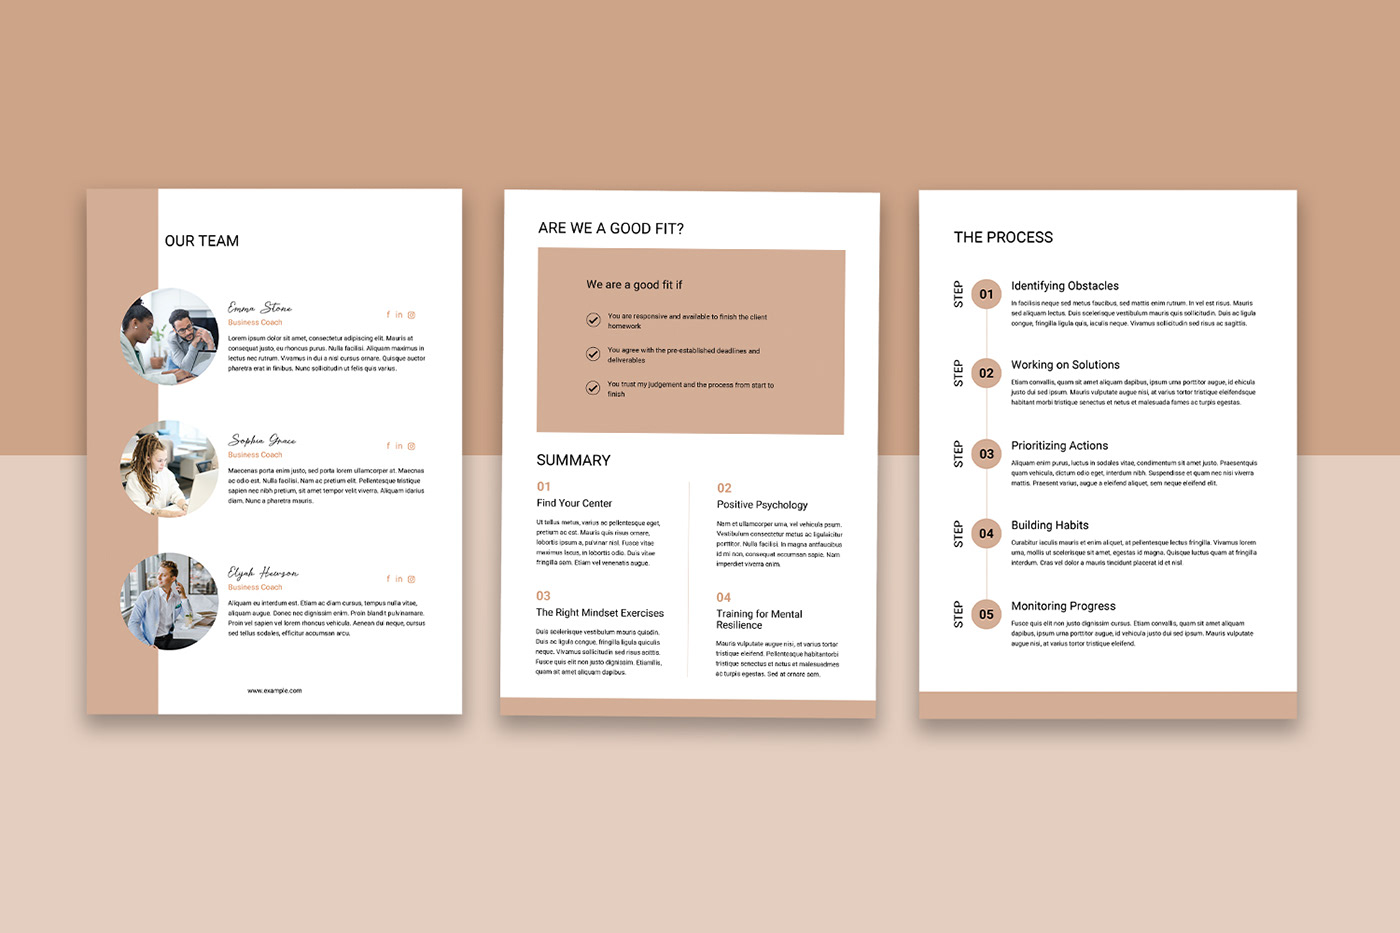 Client welcome welcome packet welcome guide service guide pricing guide welcome kit blogger workbook client onboarding coaching client welcome proposal